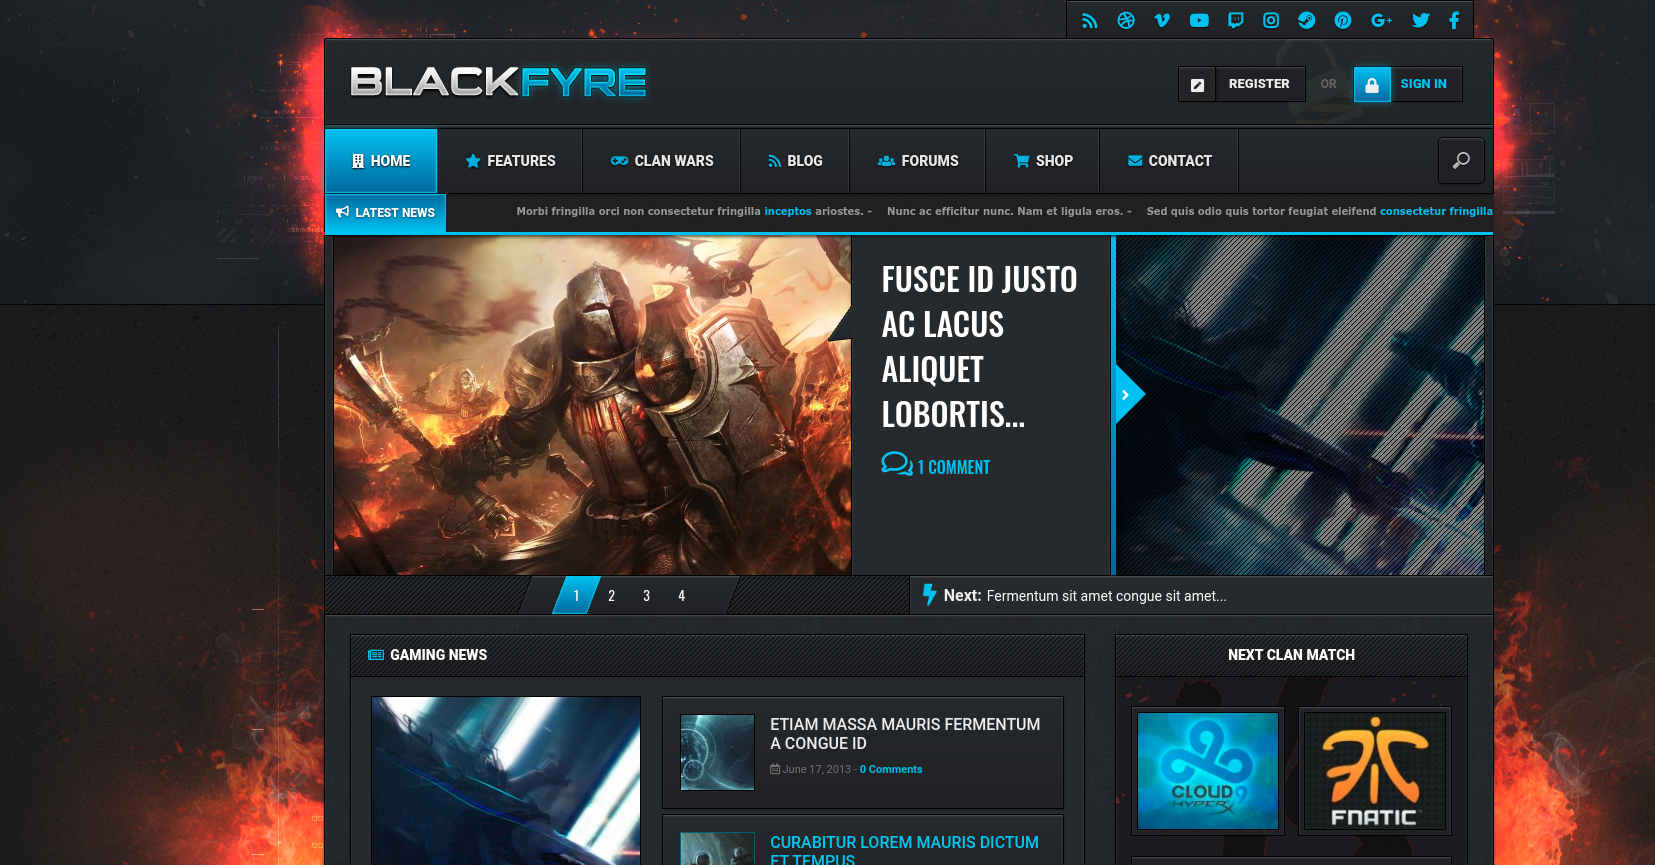 Gaming Website Templates - Pro Tips for Building a Gaming Website